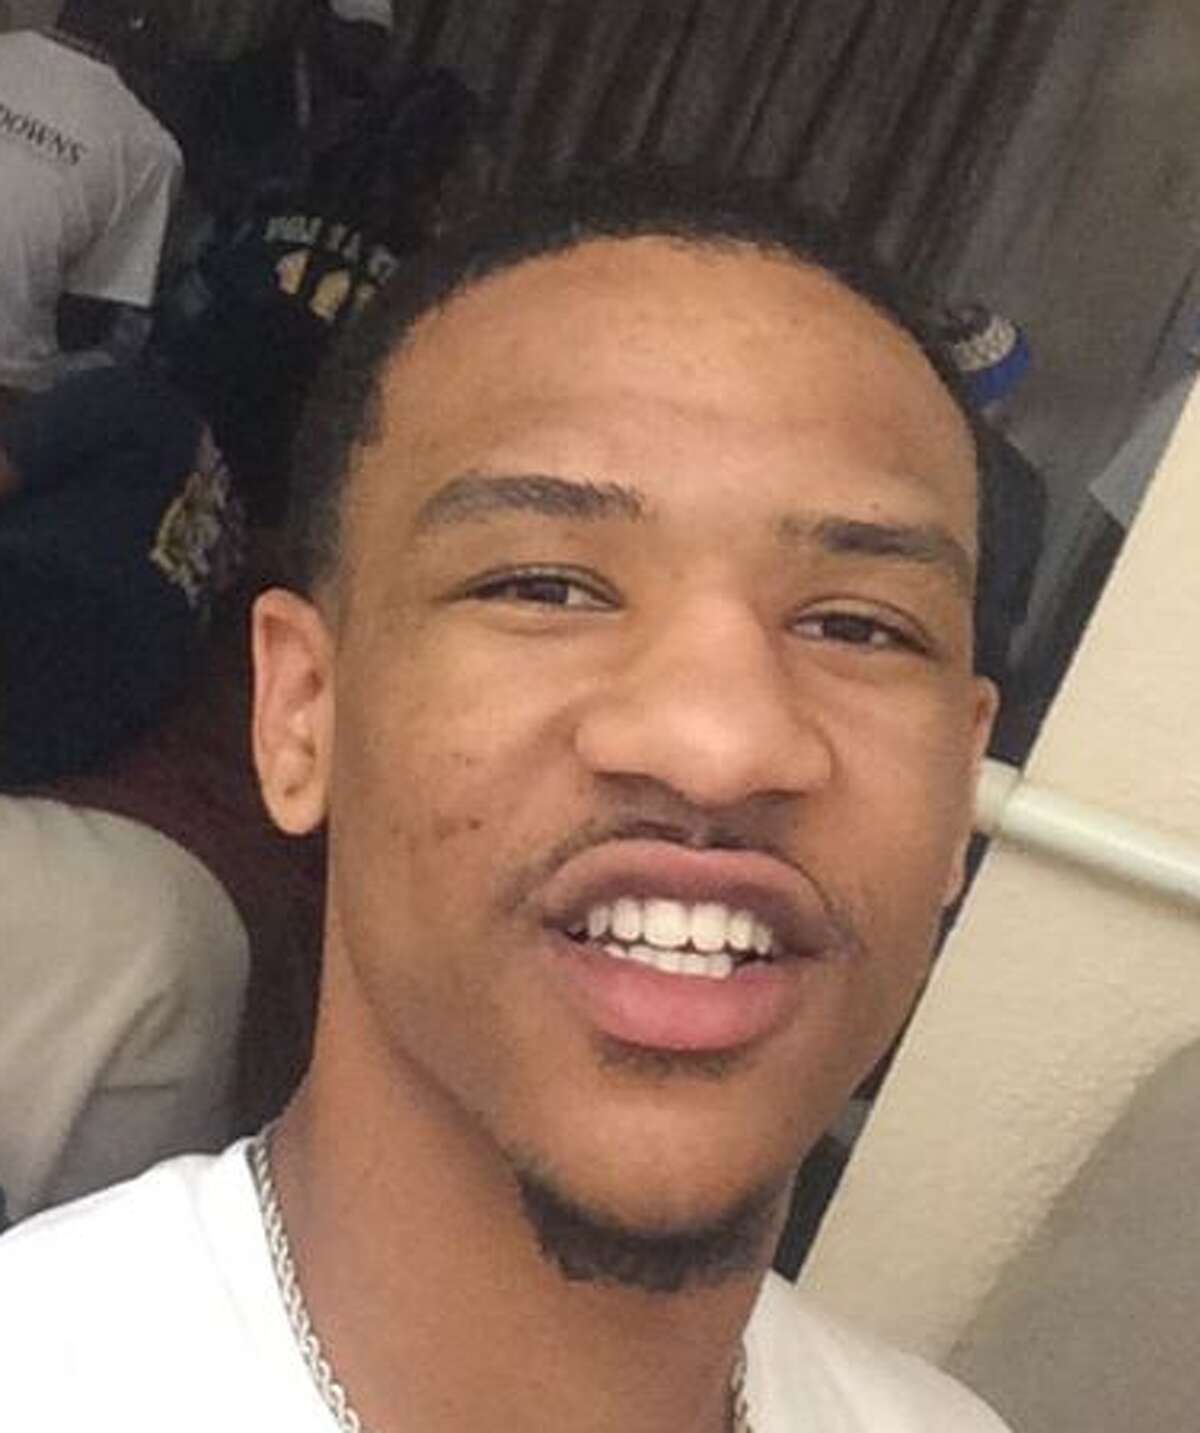 Anthony Green, 20, was shot and killed at a Beaumont gas station on Dec. 28. Photo: provided by family